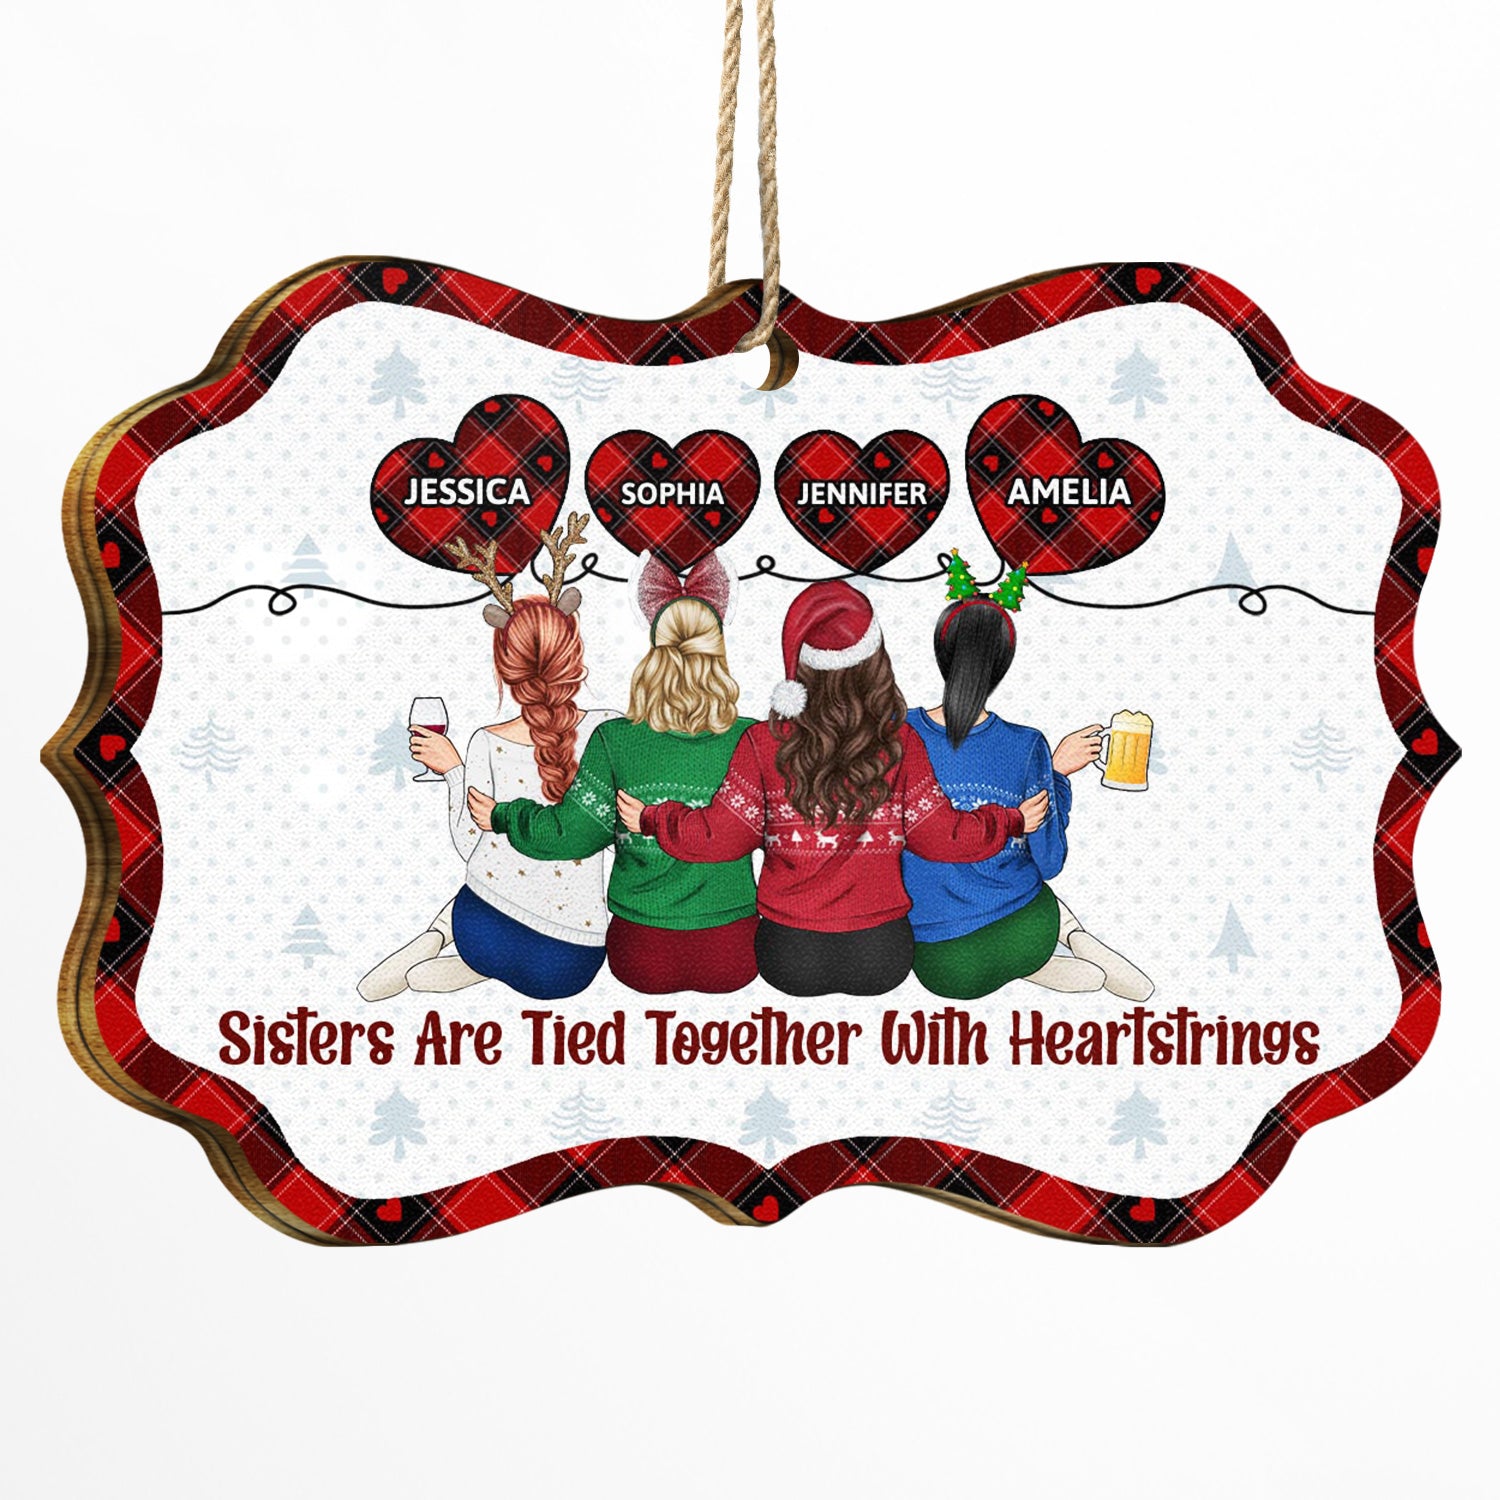 Sisters Are Tied Together With Heartstrings - Christmas Gifts For Sisters, Besties - Personalized Medallion Wooden Ornament